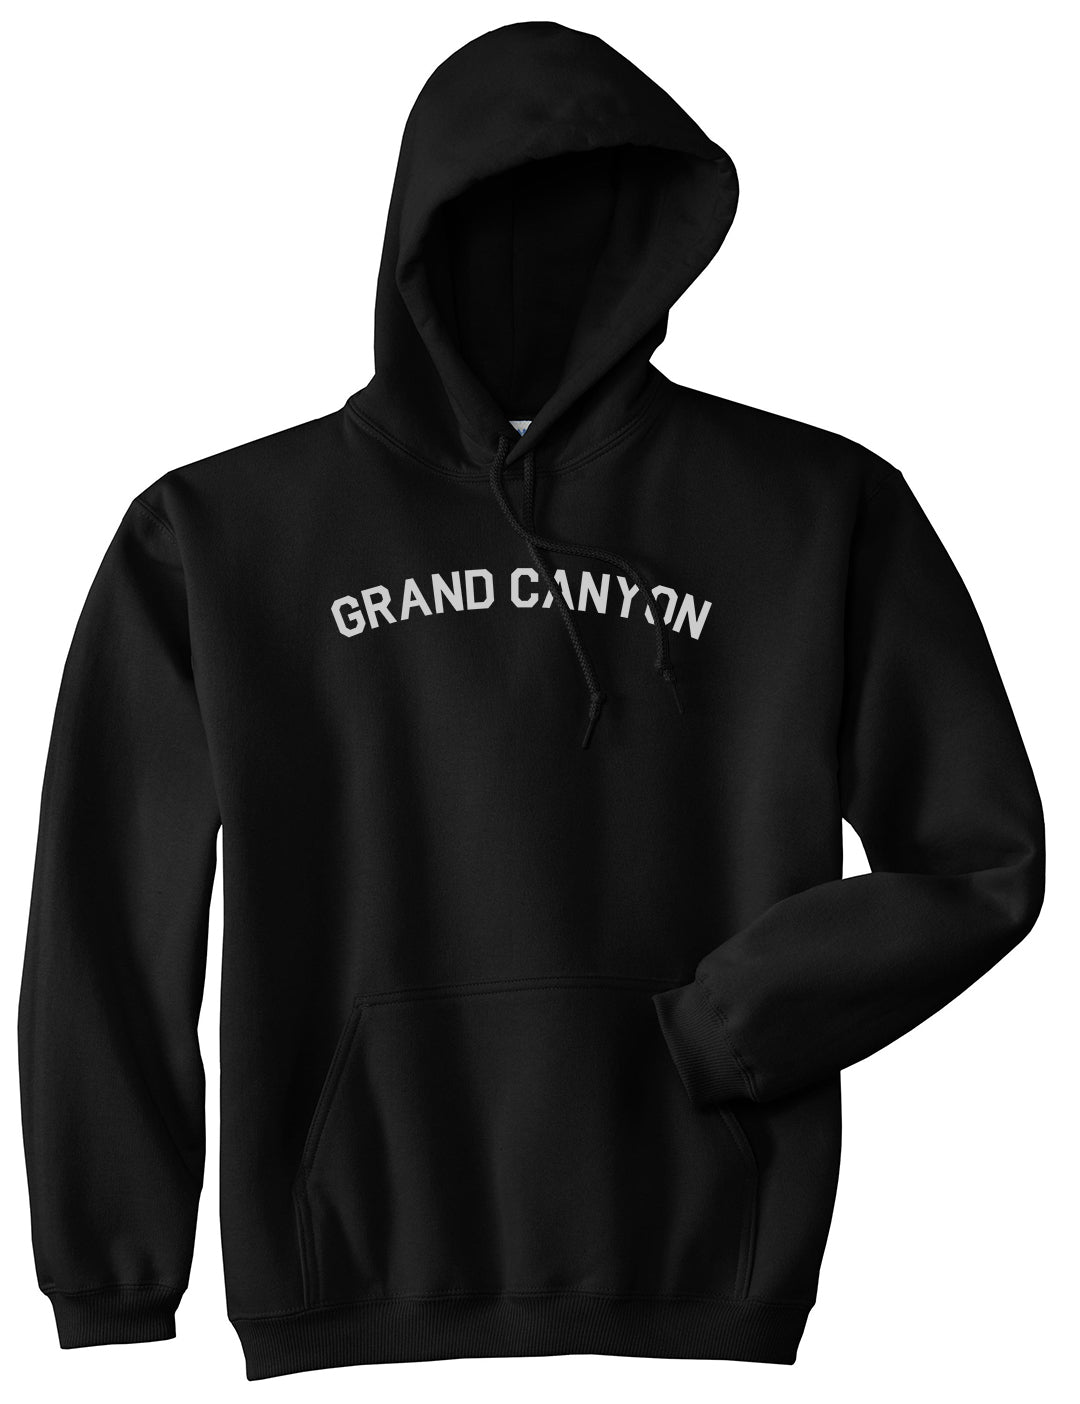 Grand Canyon Mens Black Pullover Hoodie by KINGS OF NY